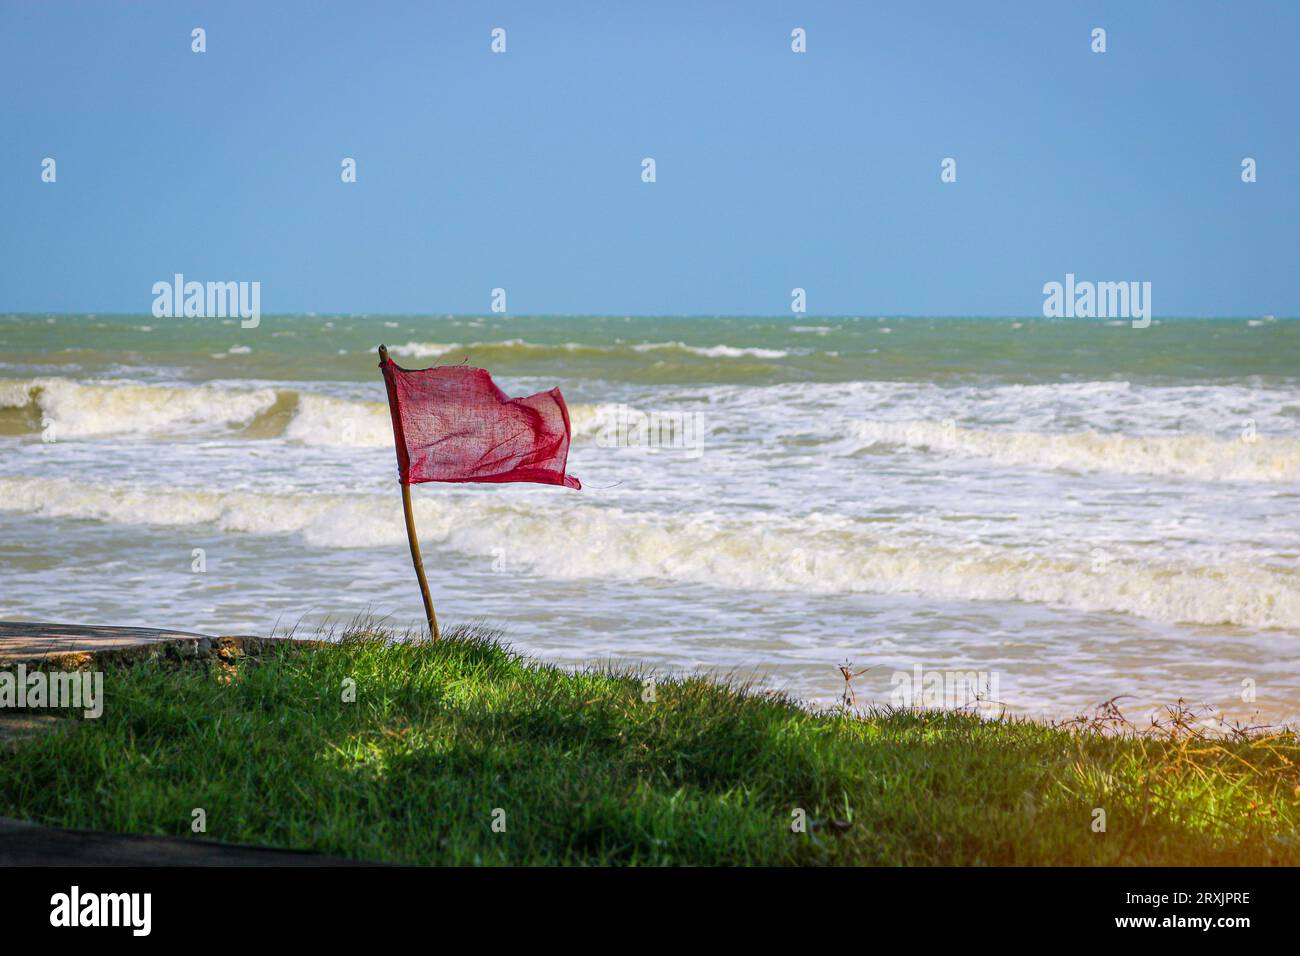 Red warning flag flapping in the wind on beach at stormy weather. Swimming is dangerous in sea waves. Stock Photo